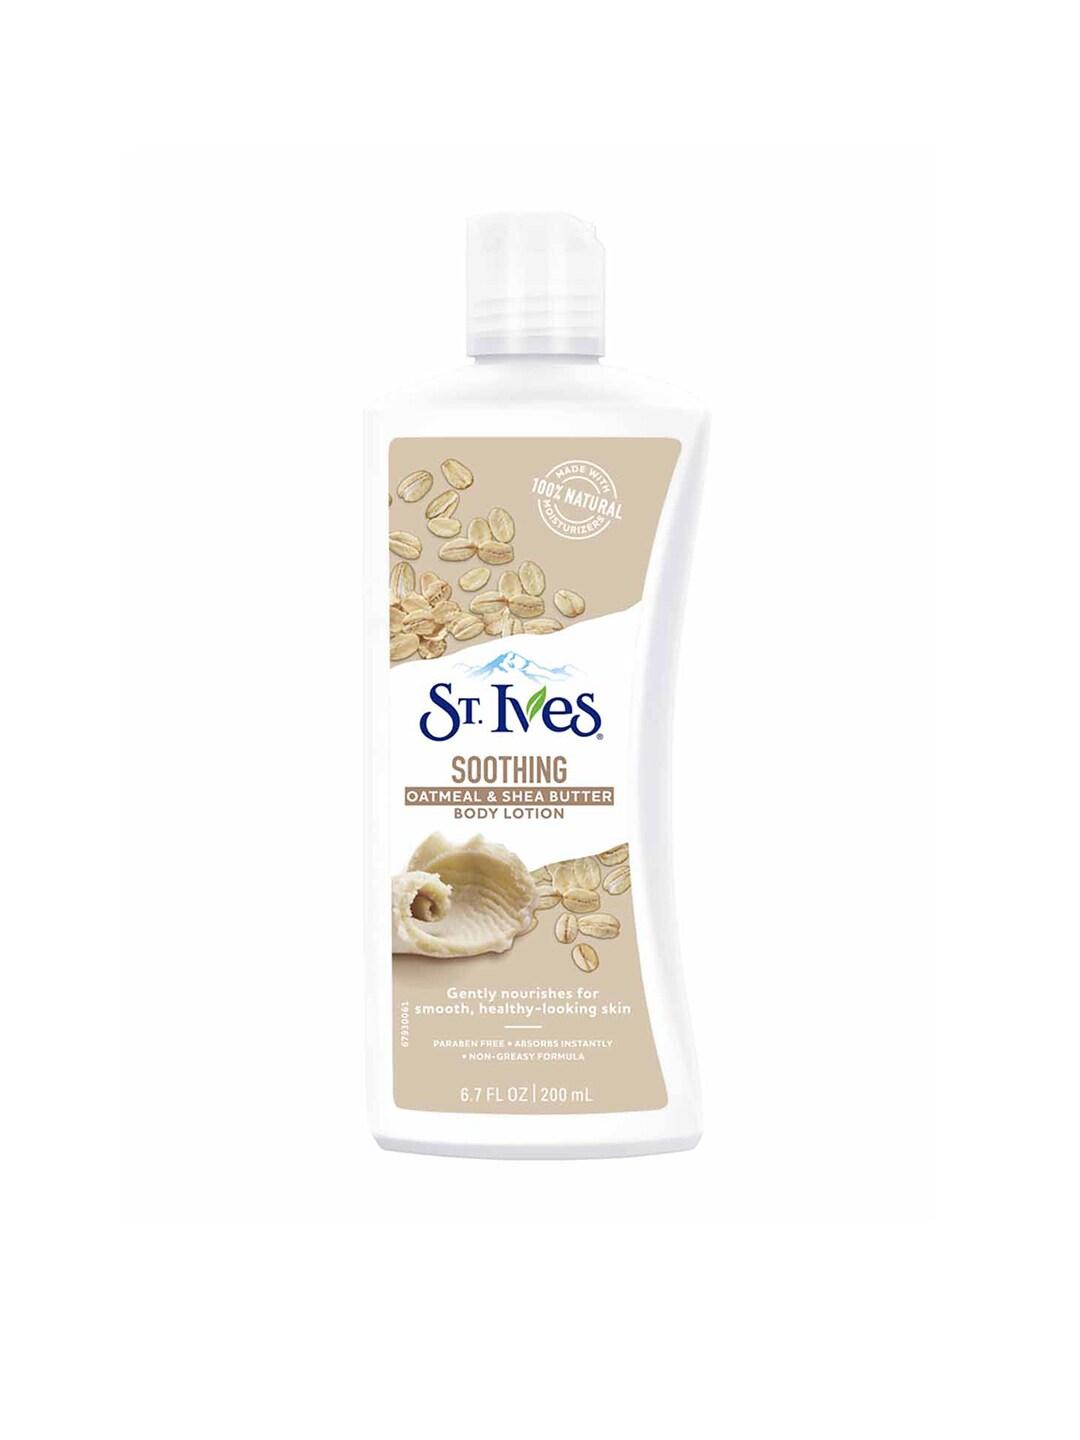 St. Ives Soothing Oatmeal & Shea Butter Body Lotion 200 ml